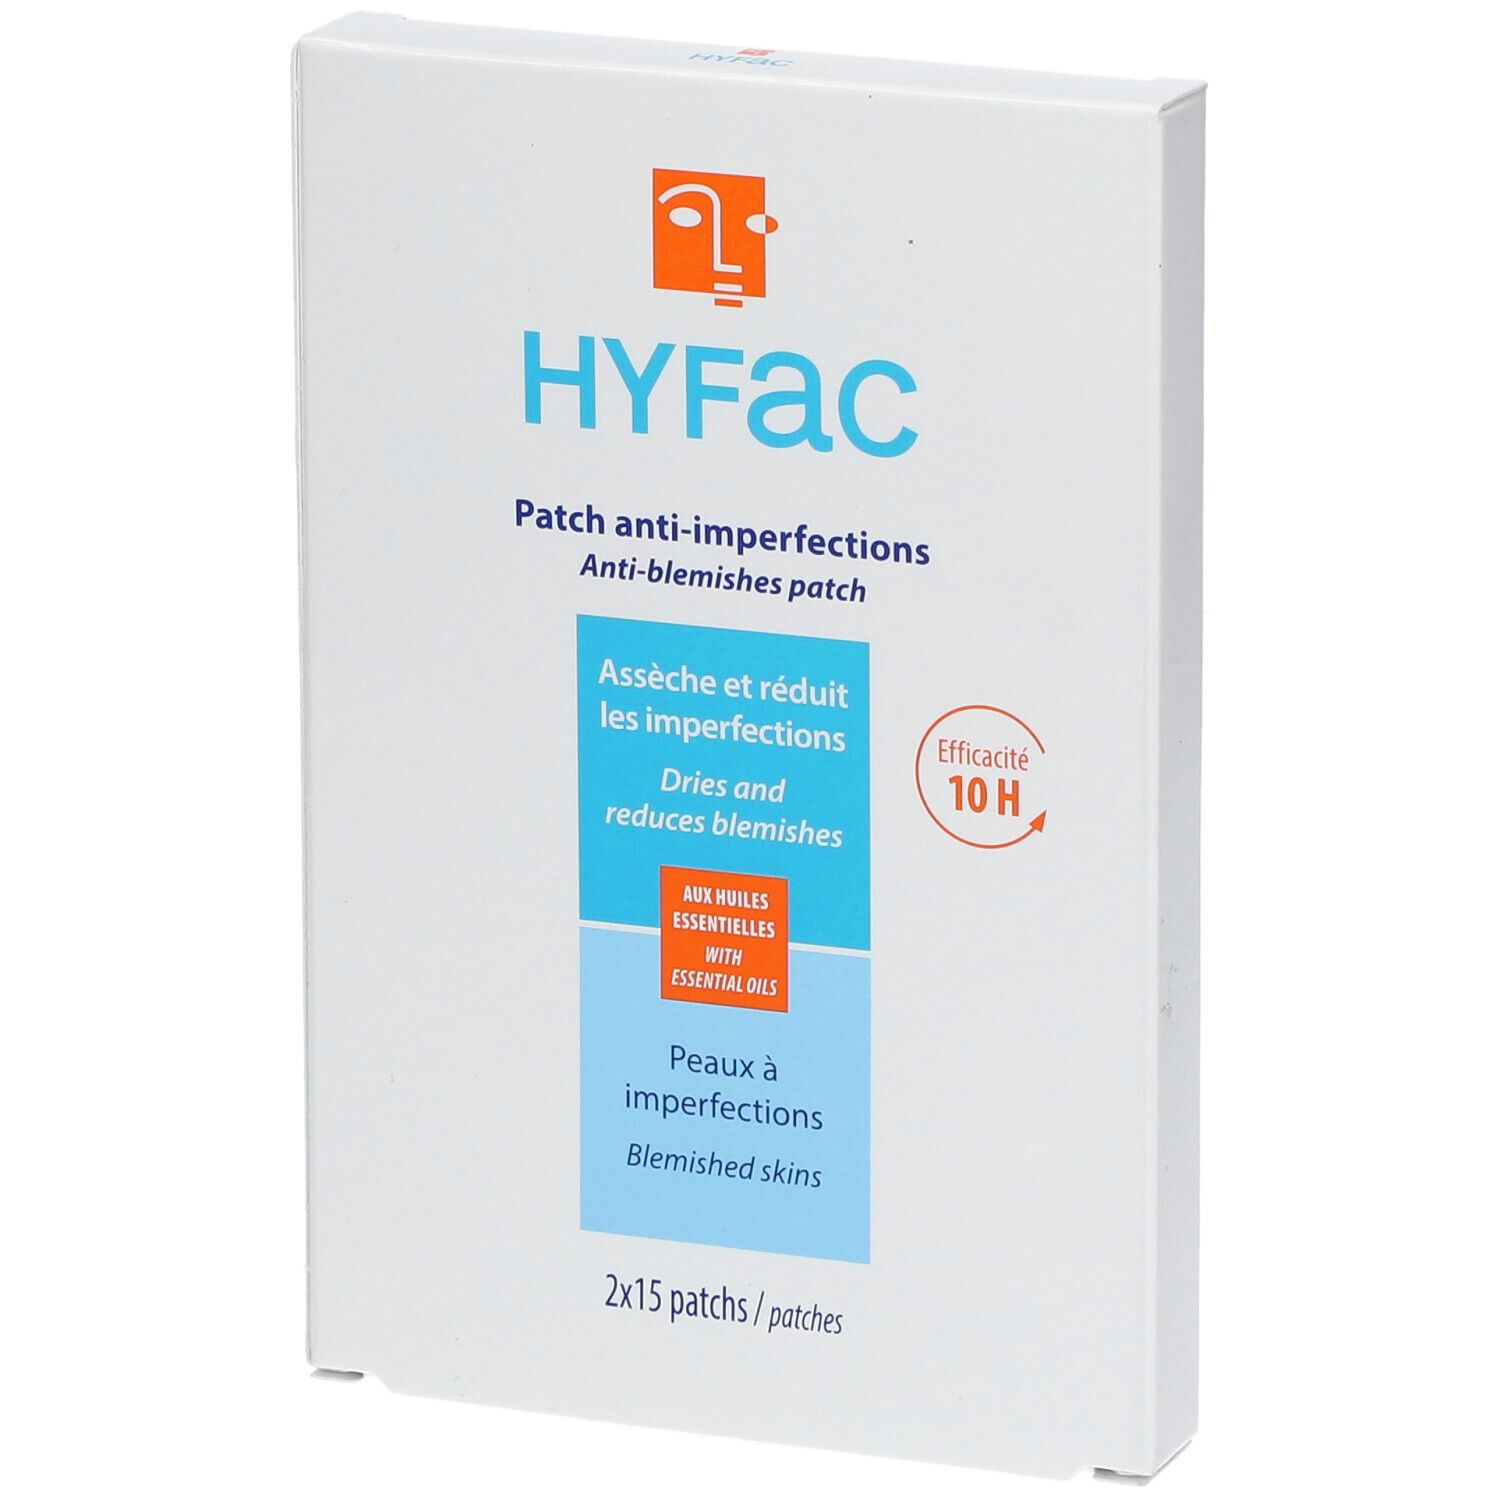 Hyfac Patchs anti-imperfections